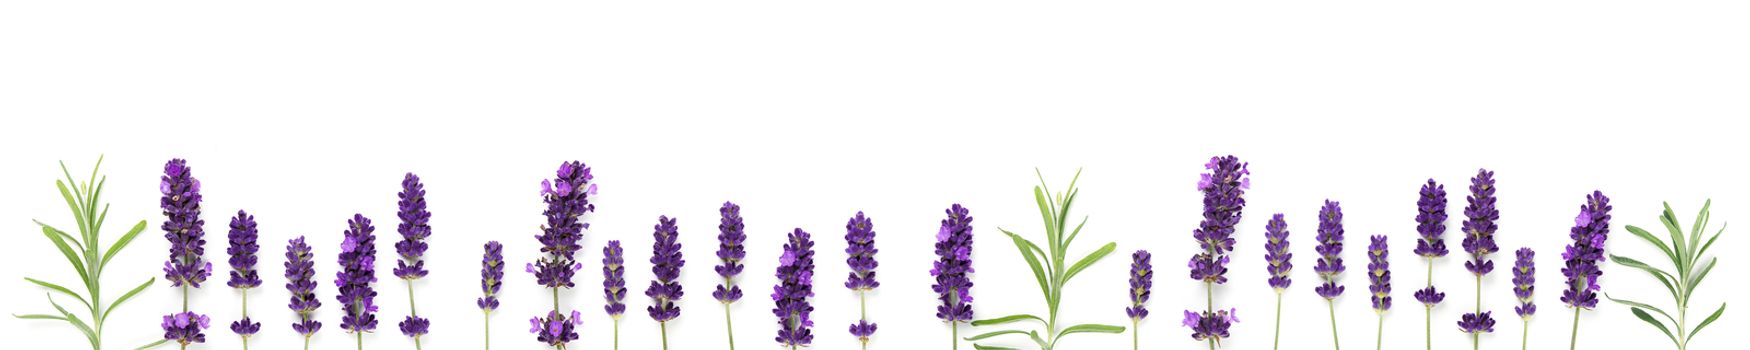 lavendel flowers blooms on white background banner. lavender flower isolated on white wide shoot.